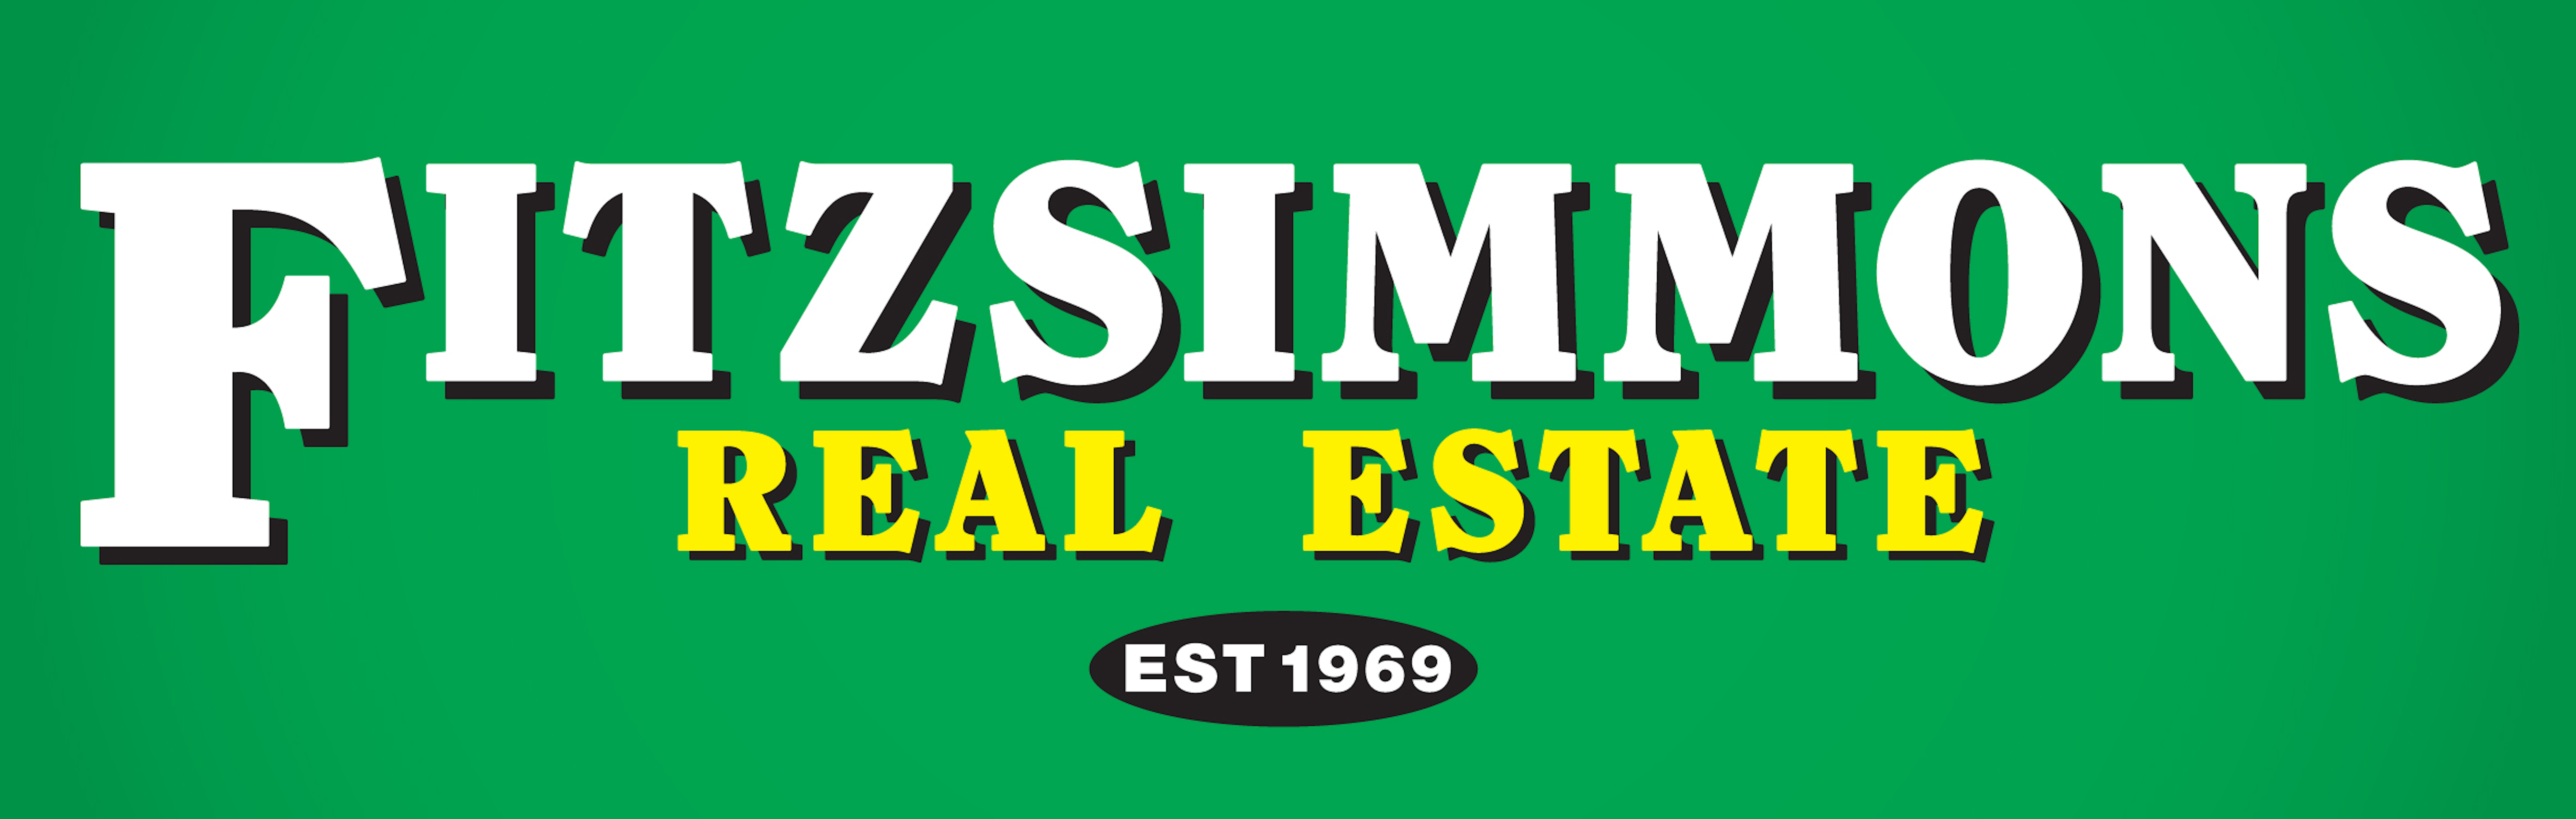 Fitzsimmons Real Estate  ABN: 58 651 342 086   Account  JS Brewer and The Trustee for Gordon William Cook Estate ABN 83 498 171 712